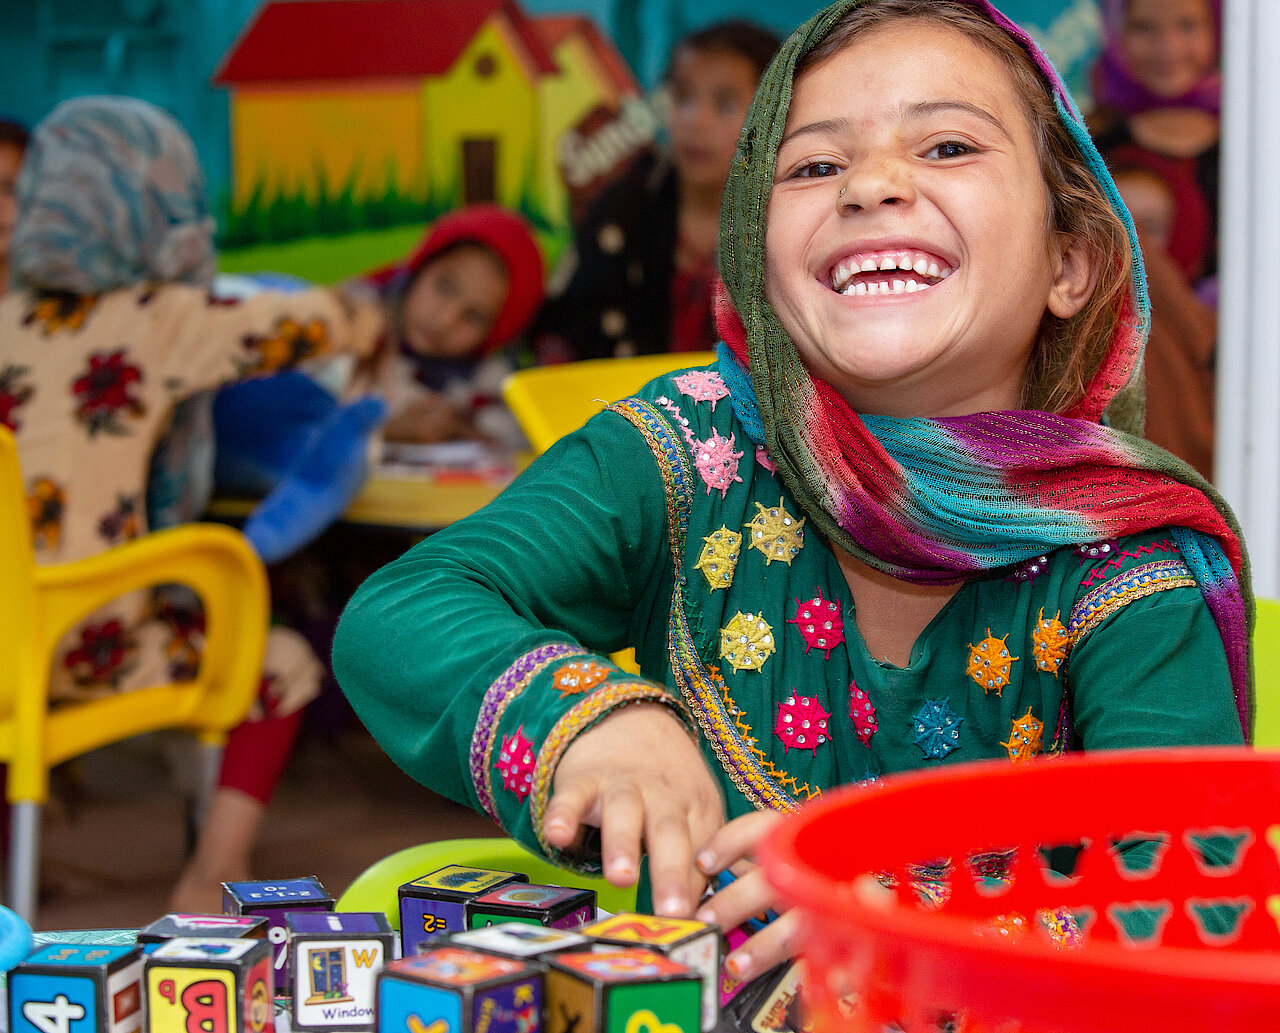 Photo: A girl with a colourful dress and scarf smiling at the camera.